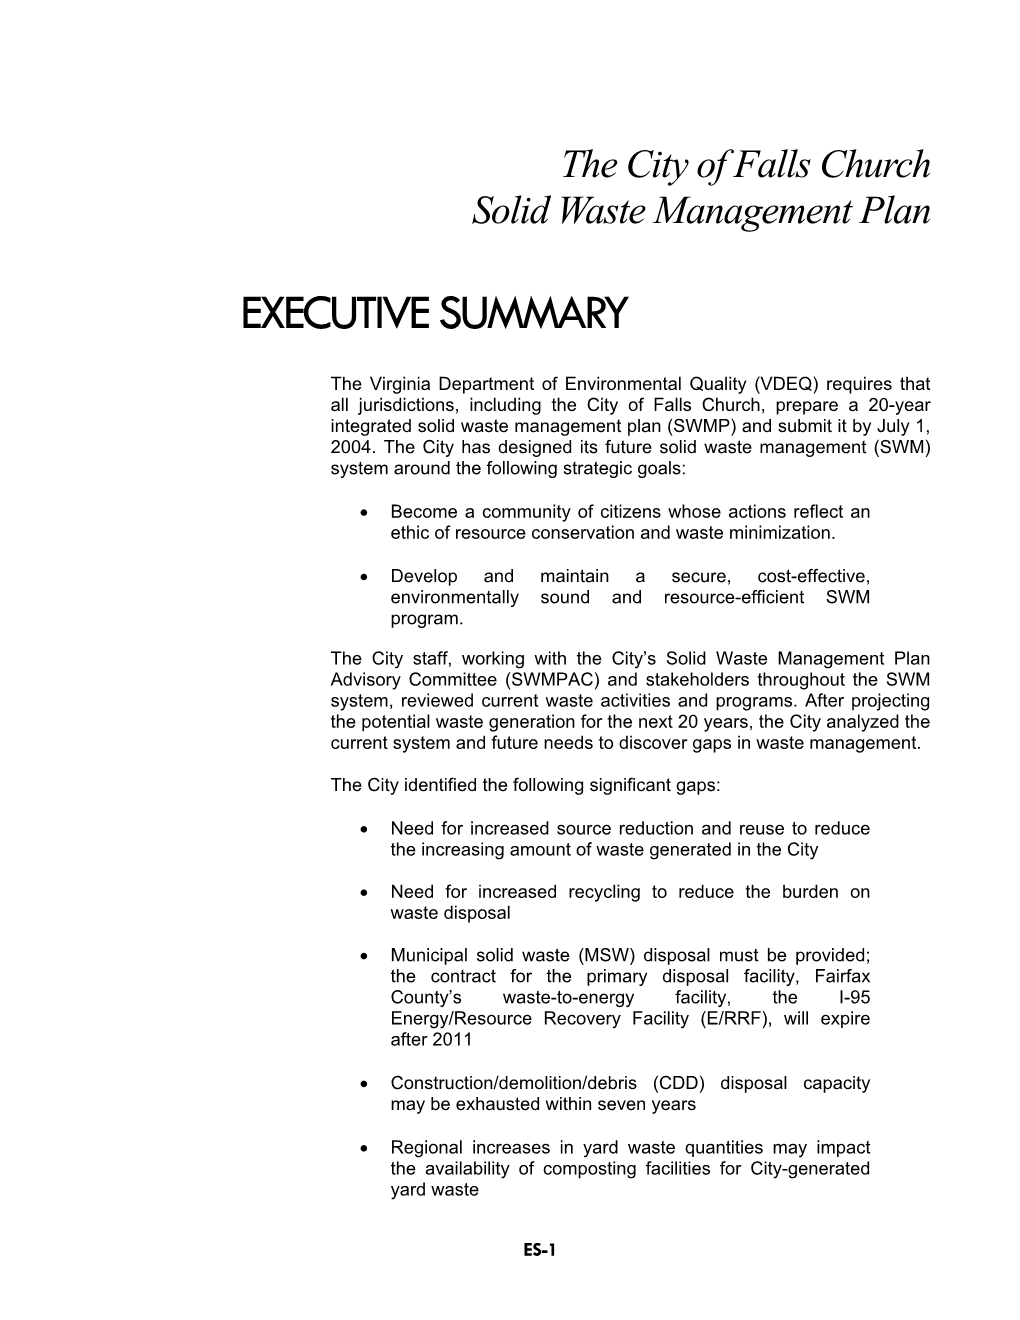 Solid Waste Management Plan Executive Summary